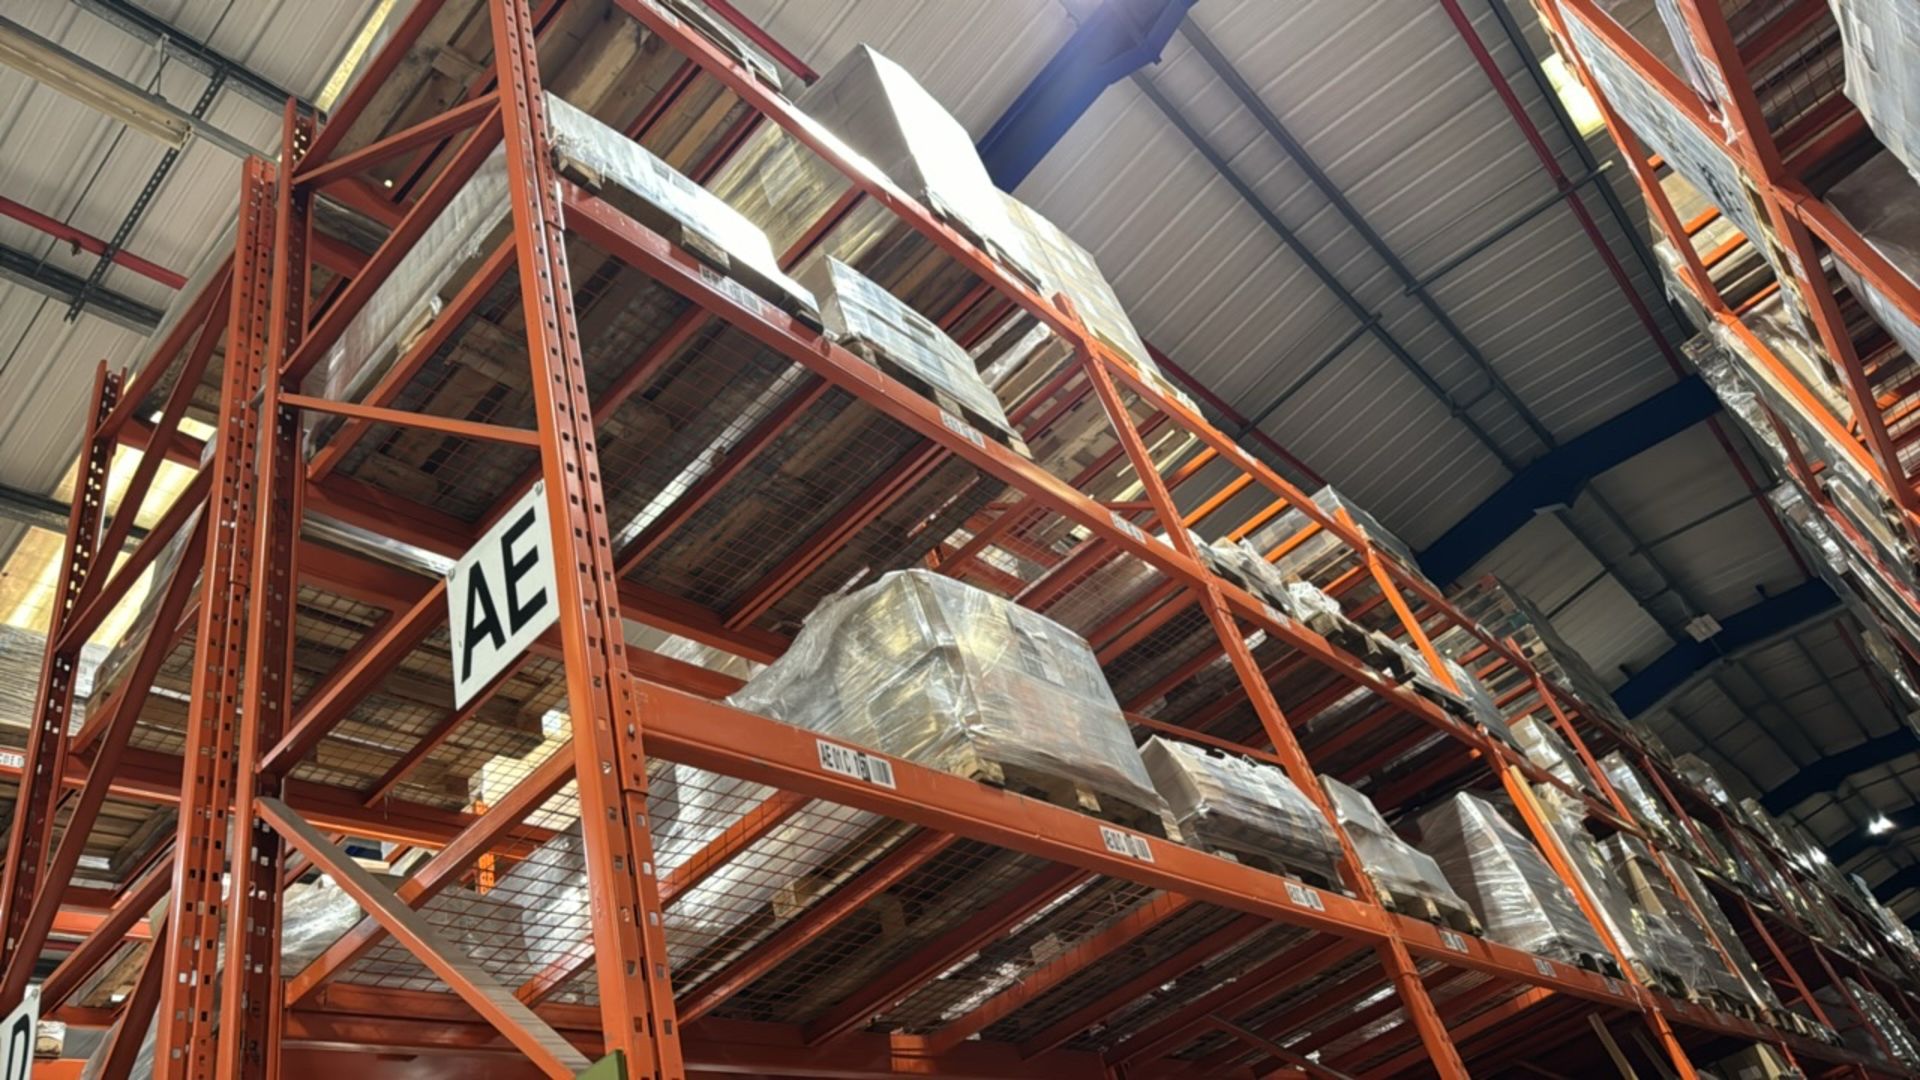 ref 5 - 23 Bays Of Boltless Pallet Racking - Image 3 of 9